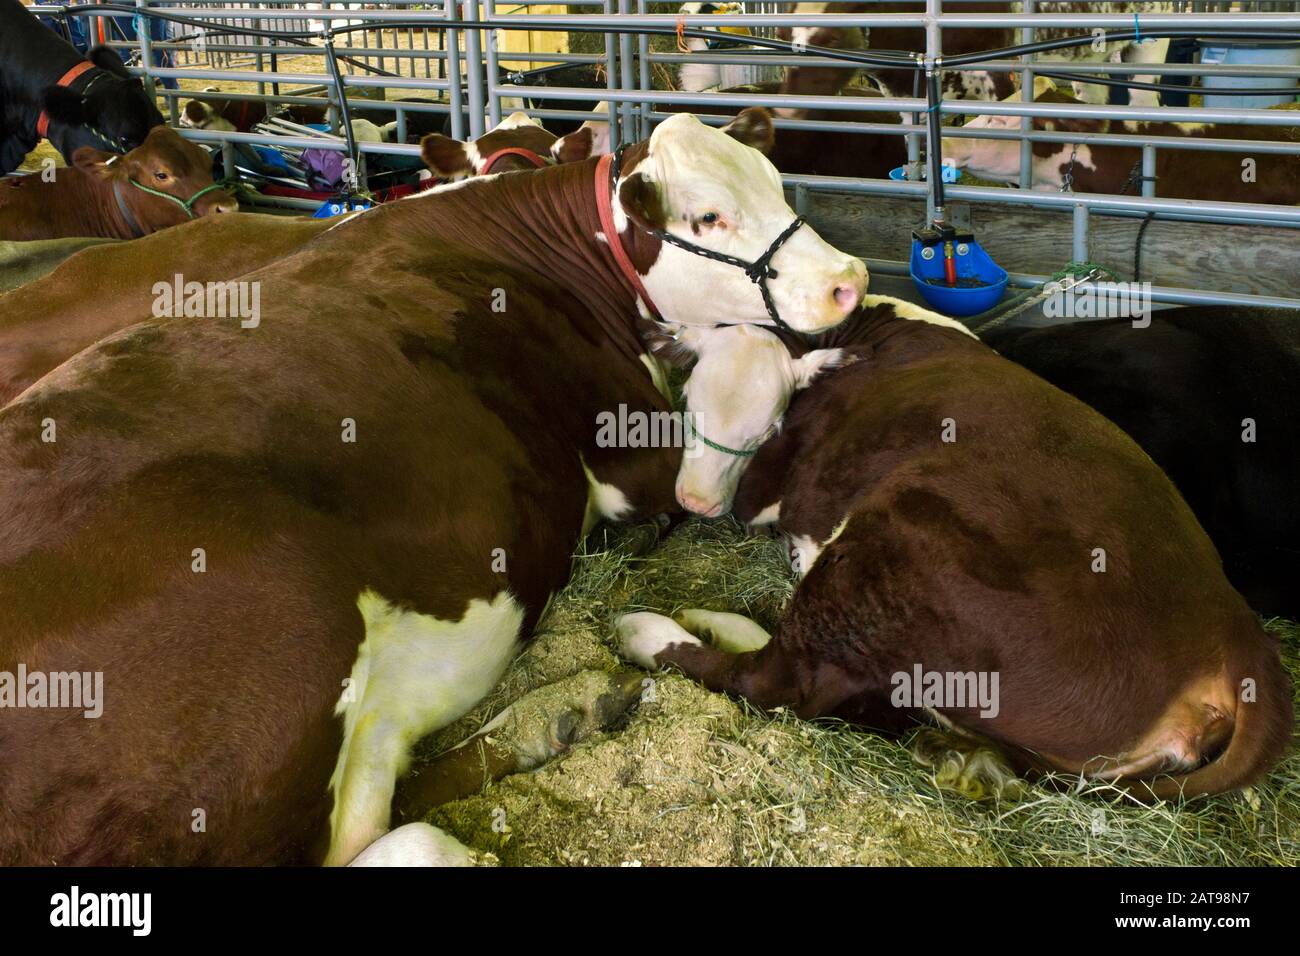 A Mother and Calf Hereford Cattle at the Wayne County Fair in Pennsylvania. This comon breed is raised for beef. Stock Photo